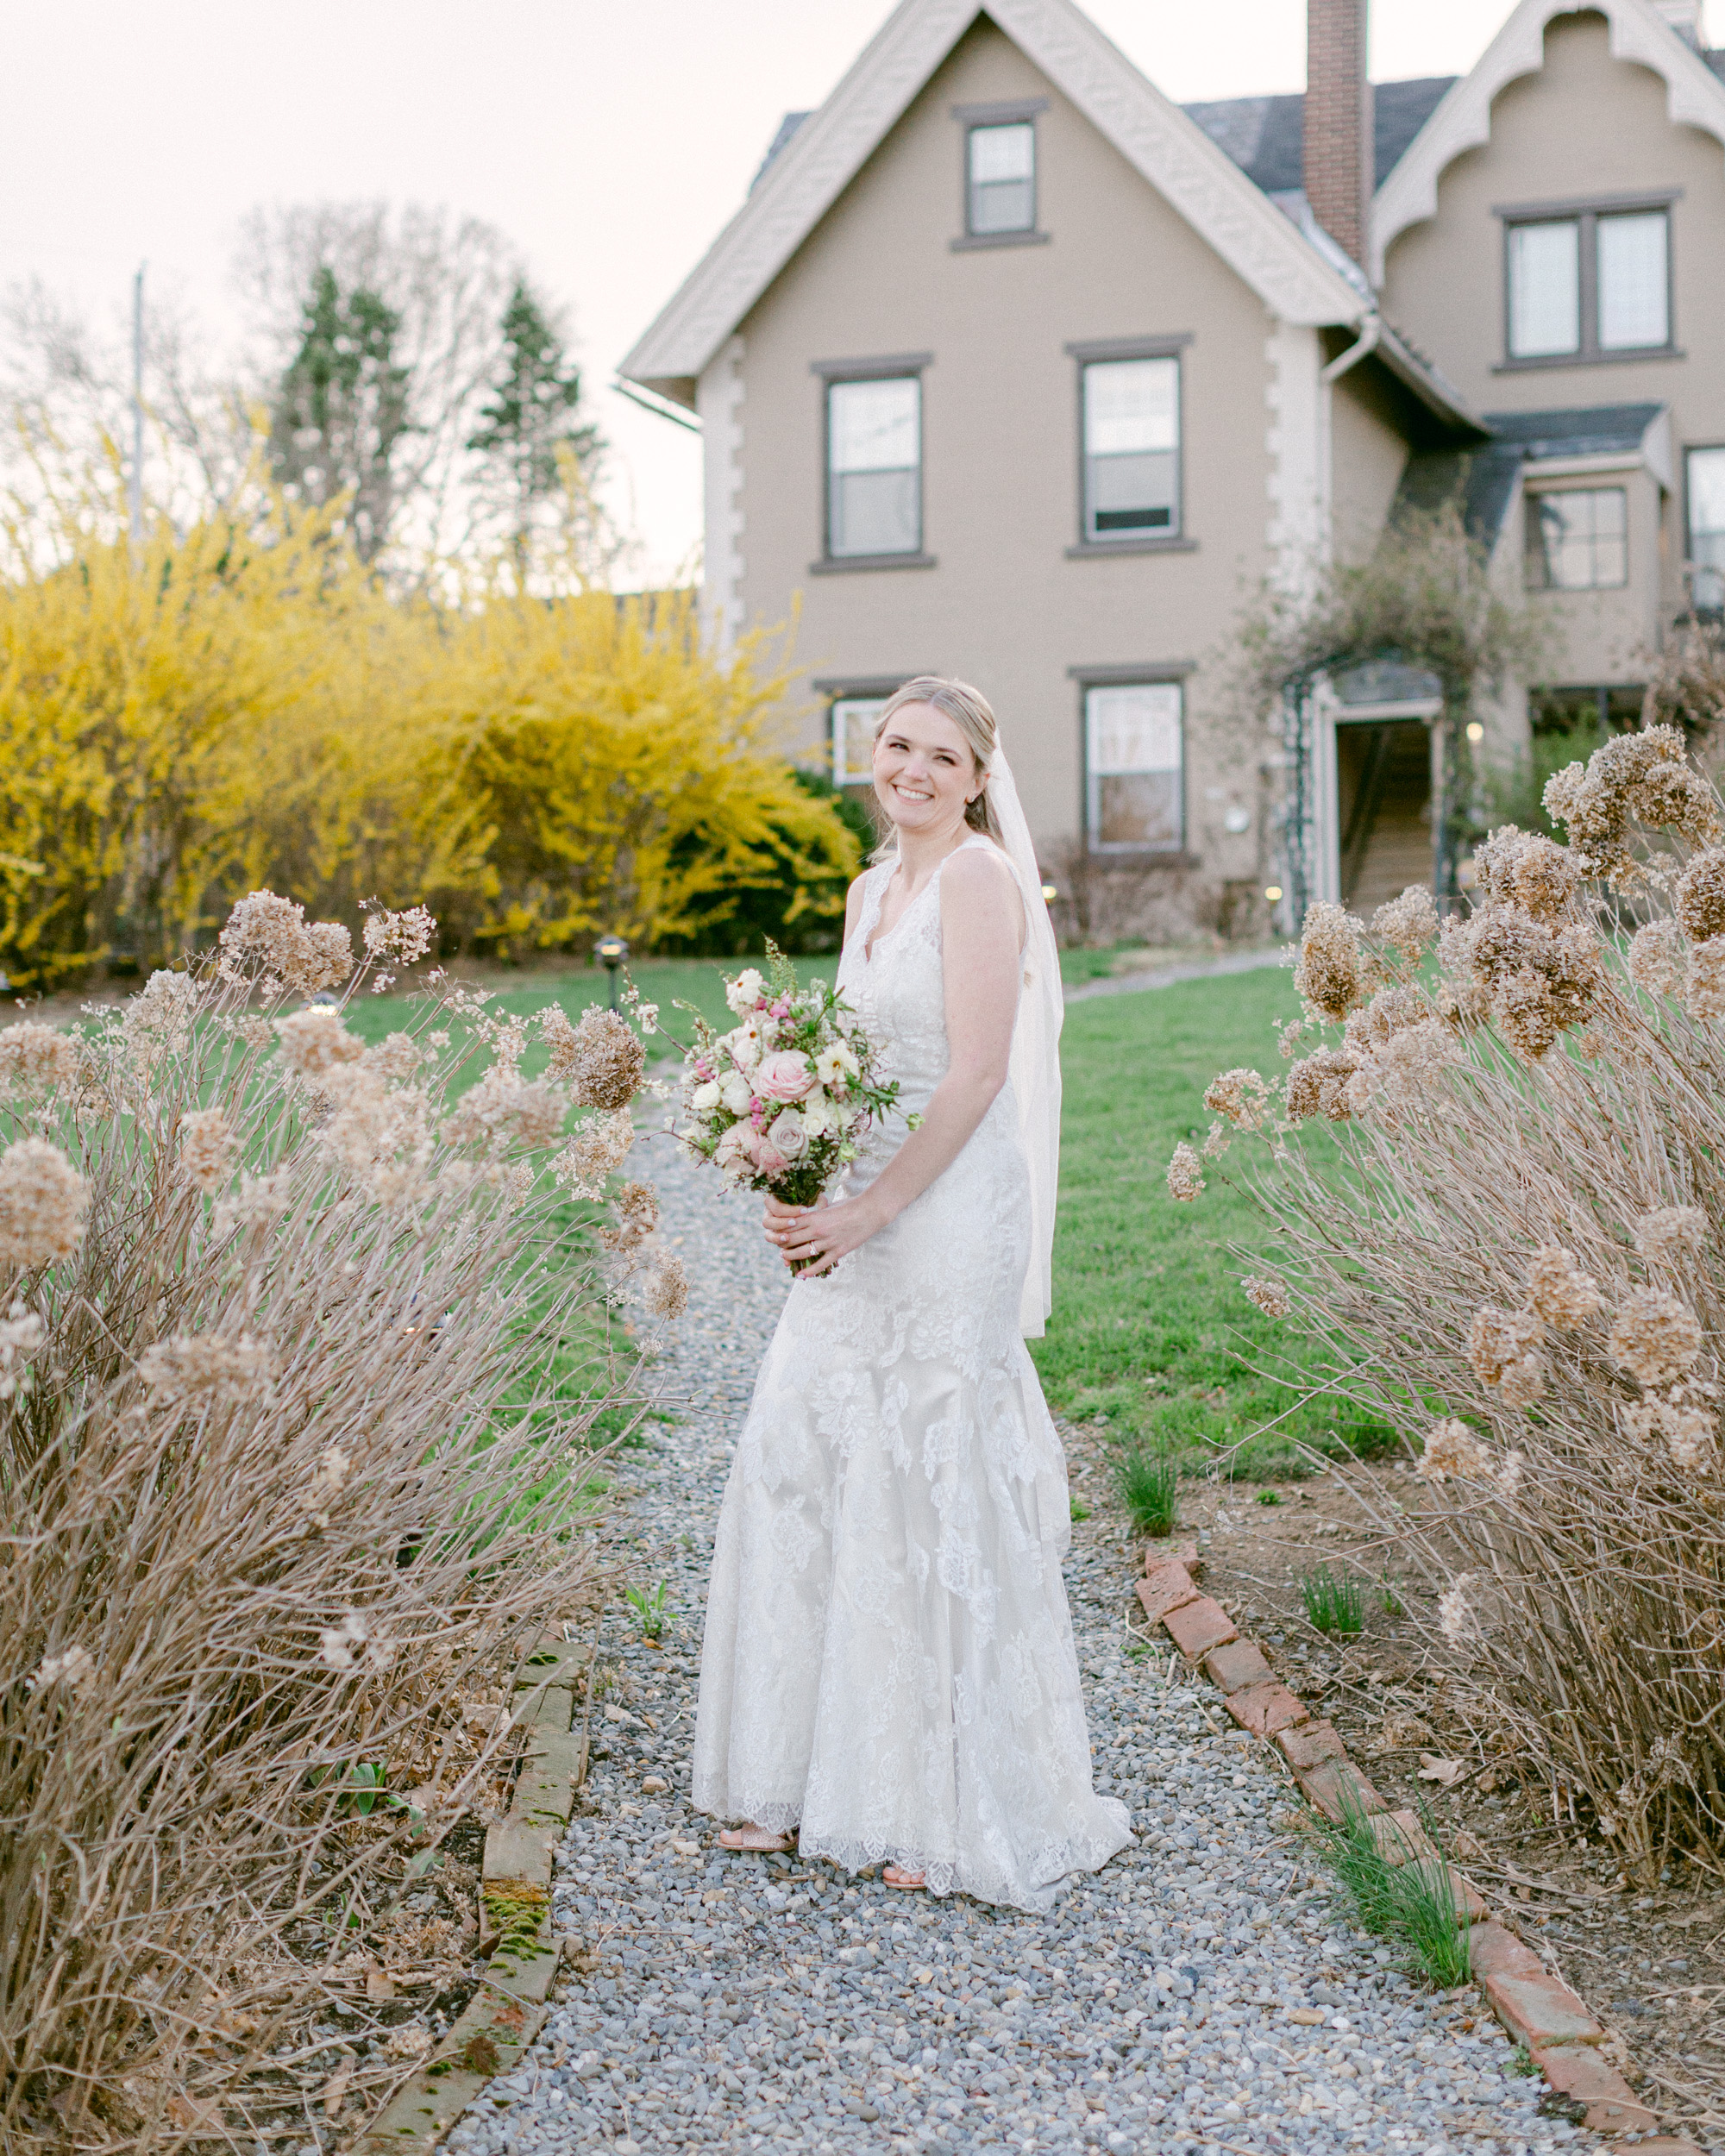 Elegant bride with a luxurious spring bouquet in front of the carriage house at the Sayre Mansion in Bethlehem, PA by Laura Billingham Photography